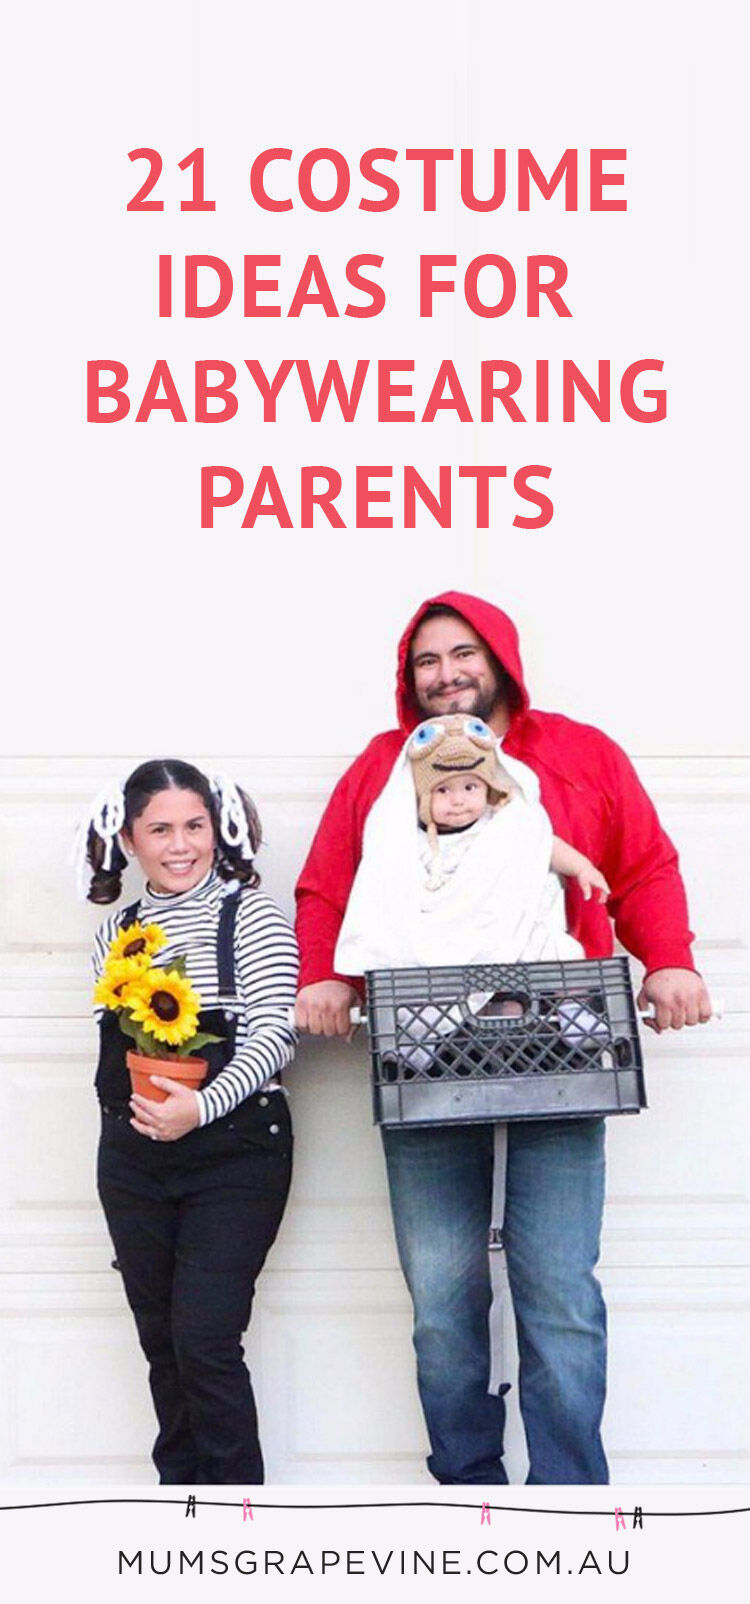 Halloween costume ideas for babywearing parents